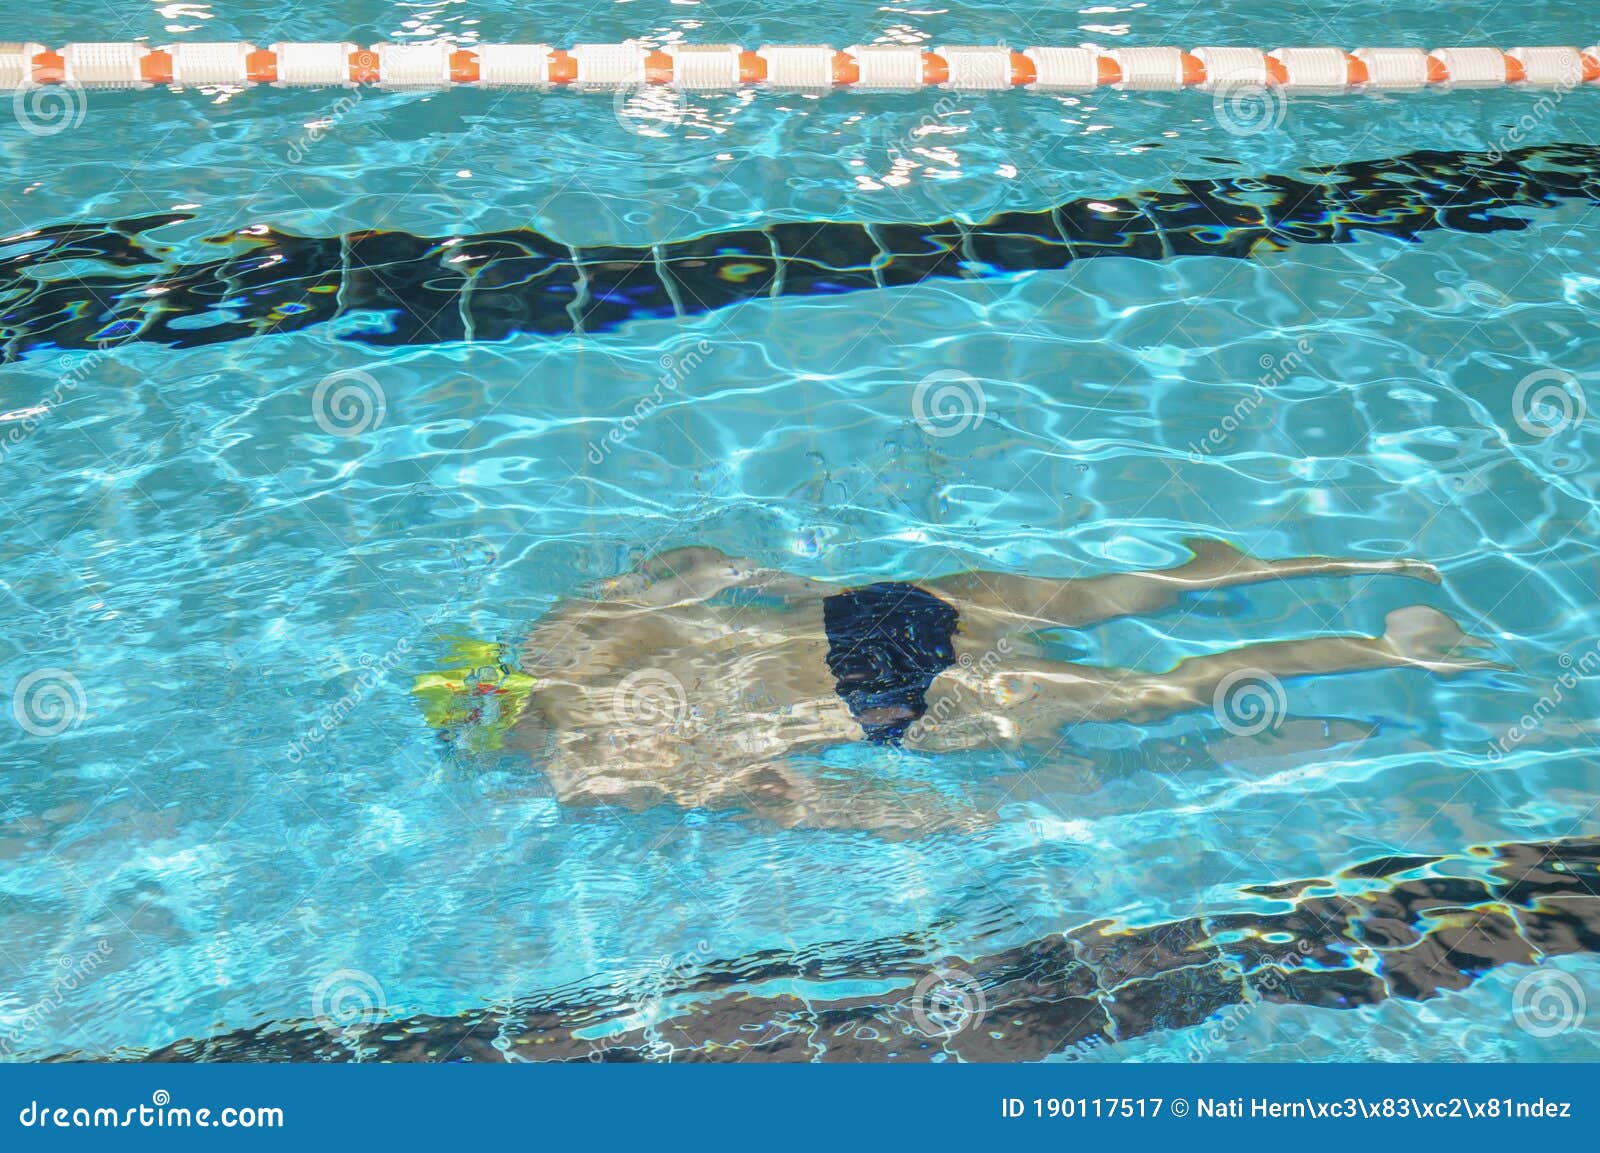 swimmer, man swimming underwater in a pool